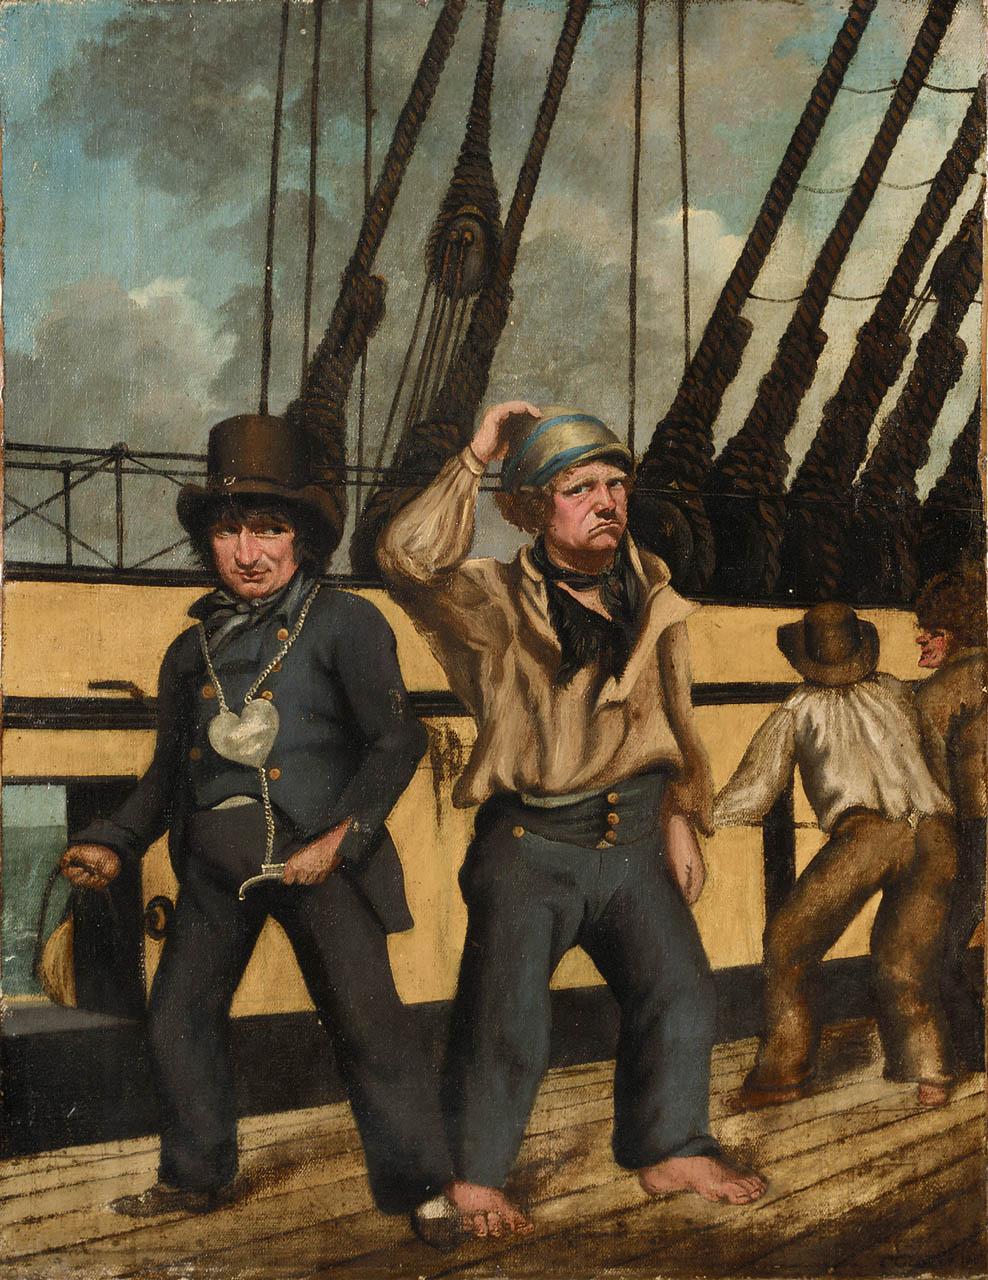 A painting showing two men on board ship, one wearing a top hat and suit, another wearing rough sailor clothes and bare feet